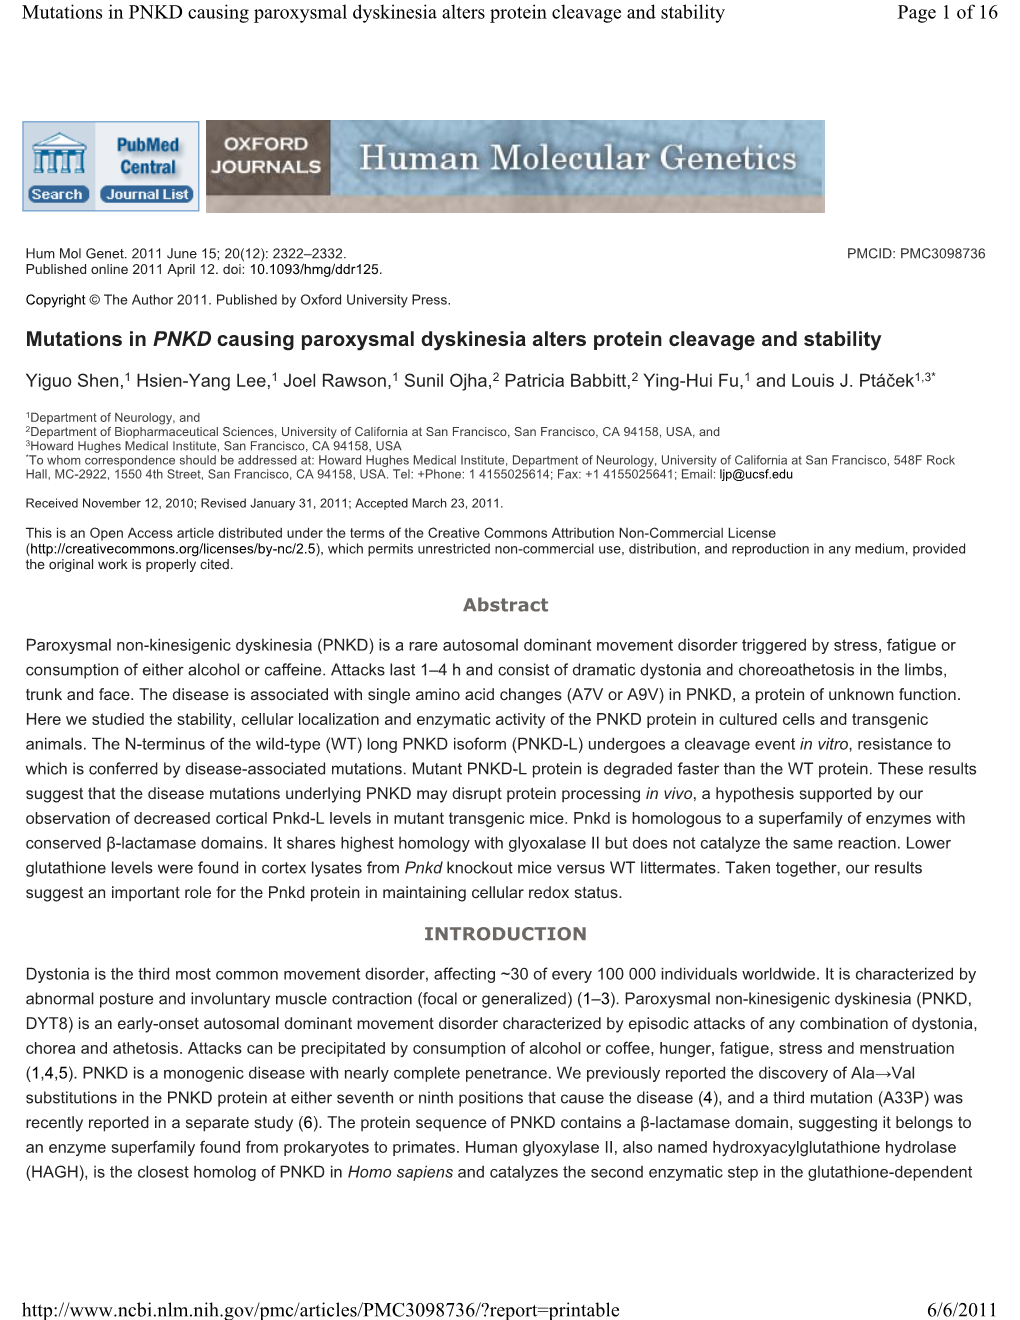 Mutations in PNKD Causing Paroxysmal Dyskinesia Alters Protein Cleavage and Stability Page 1 of 16